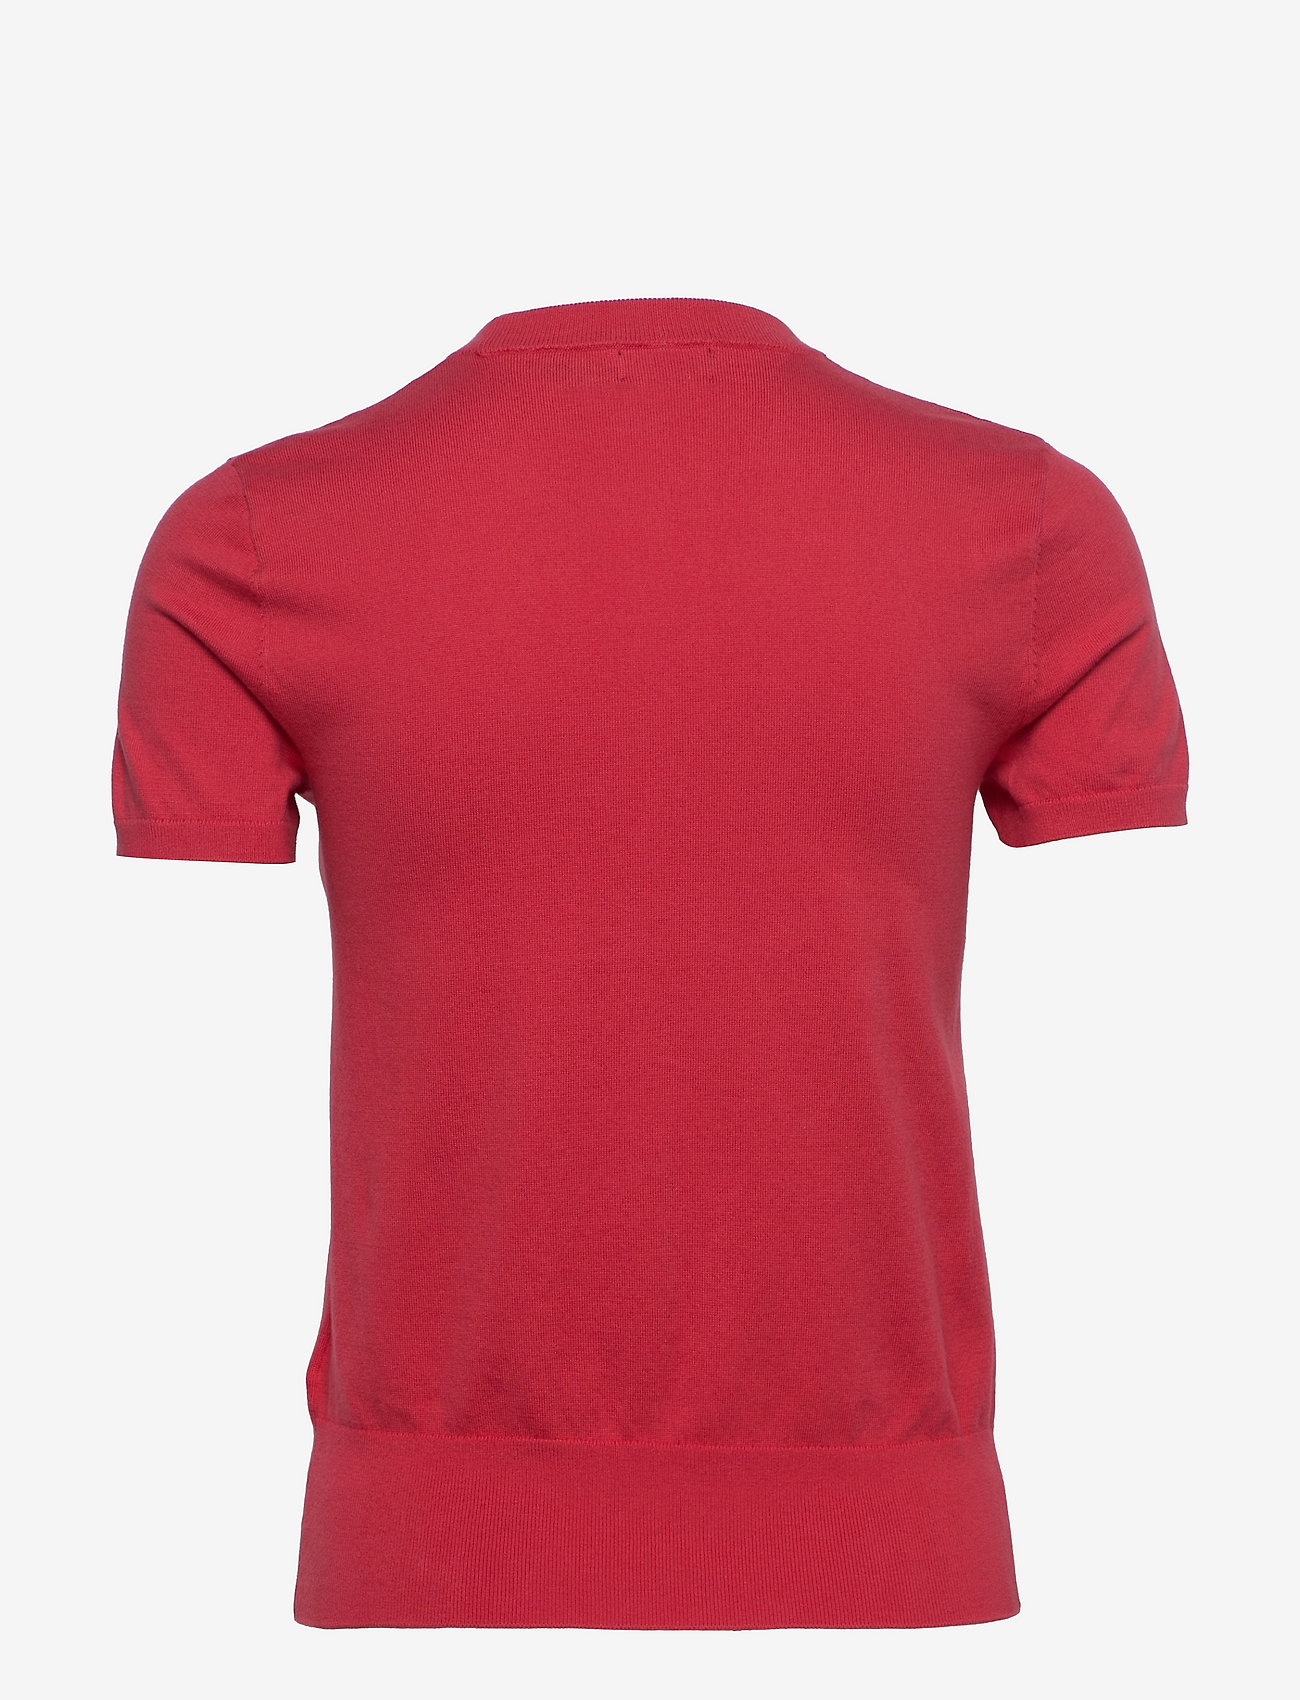 Polo Ralph Lauren - Cotton-Blend Short-Sleeve Sweater - jumpers - starboard red - 1